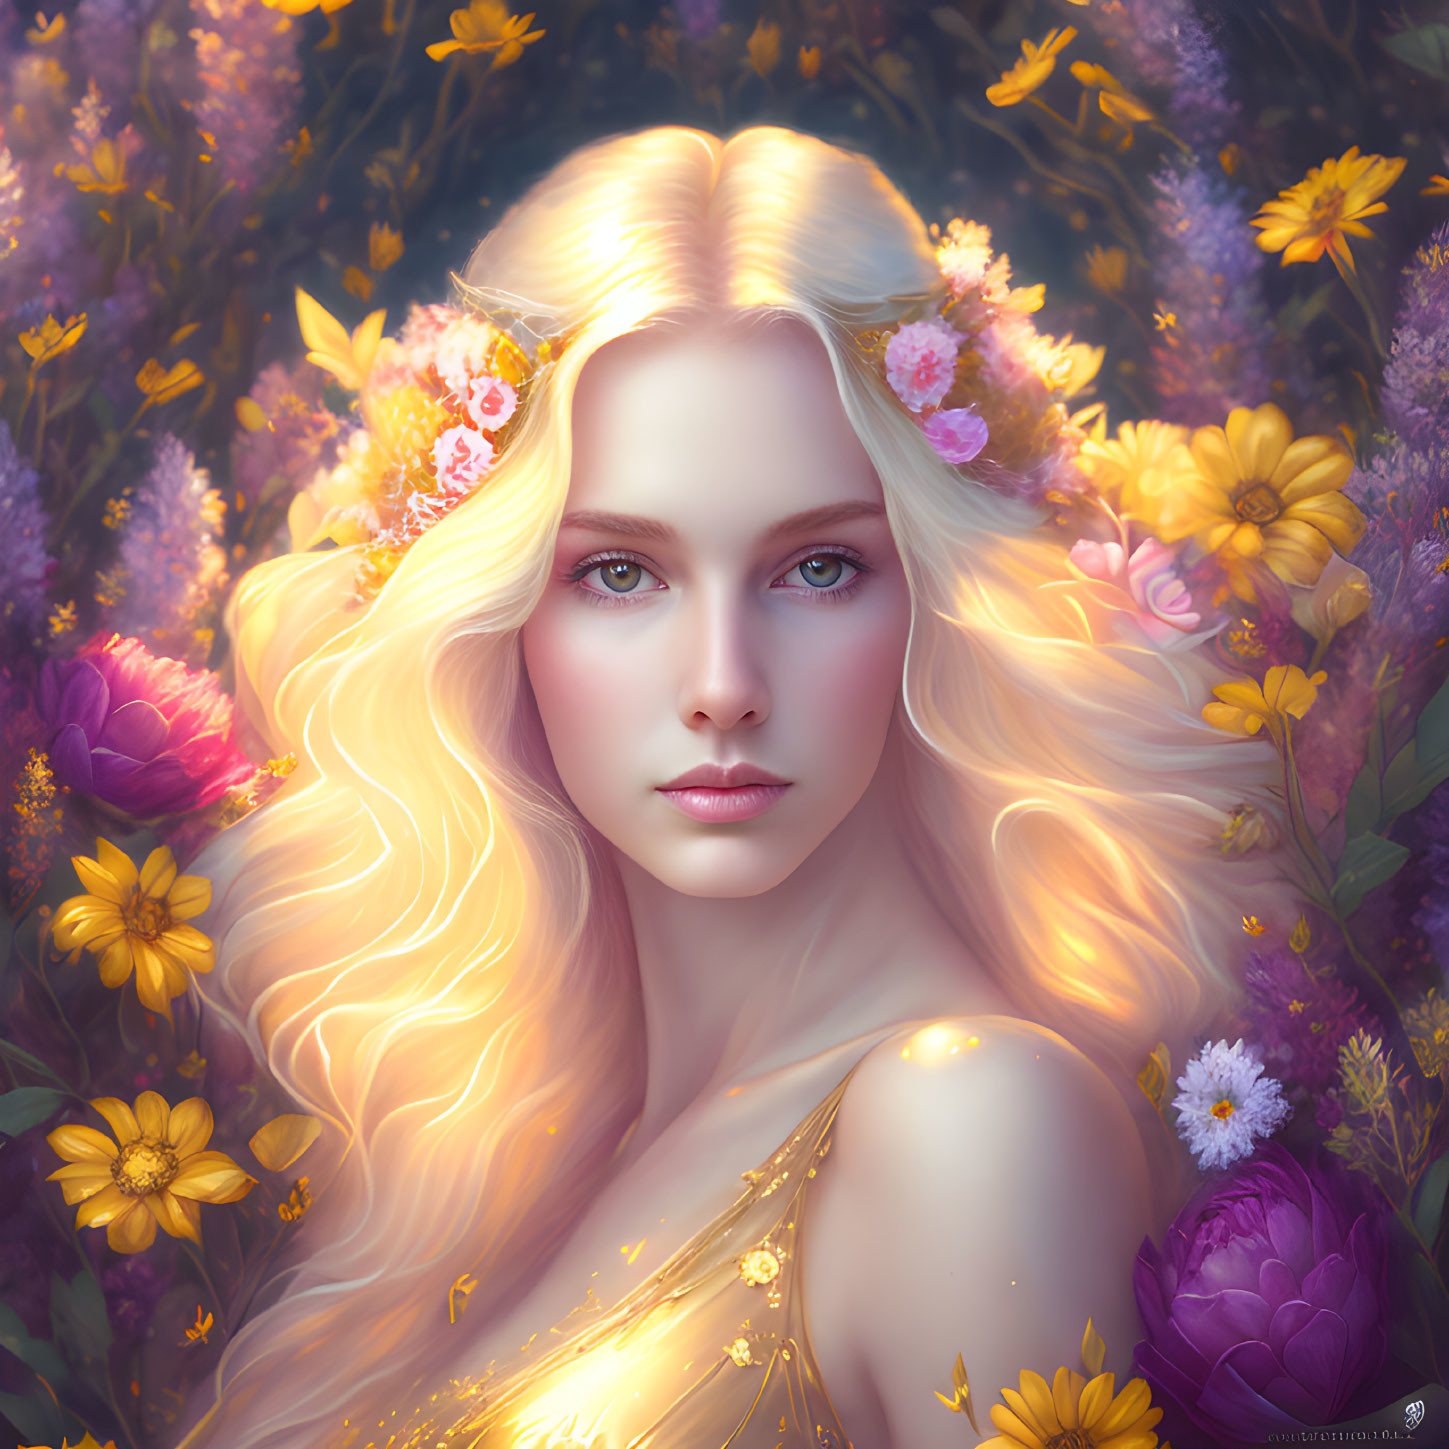 Blonde Woman Portrait with Floral Background